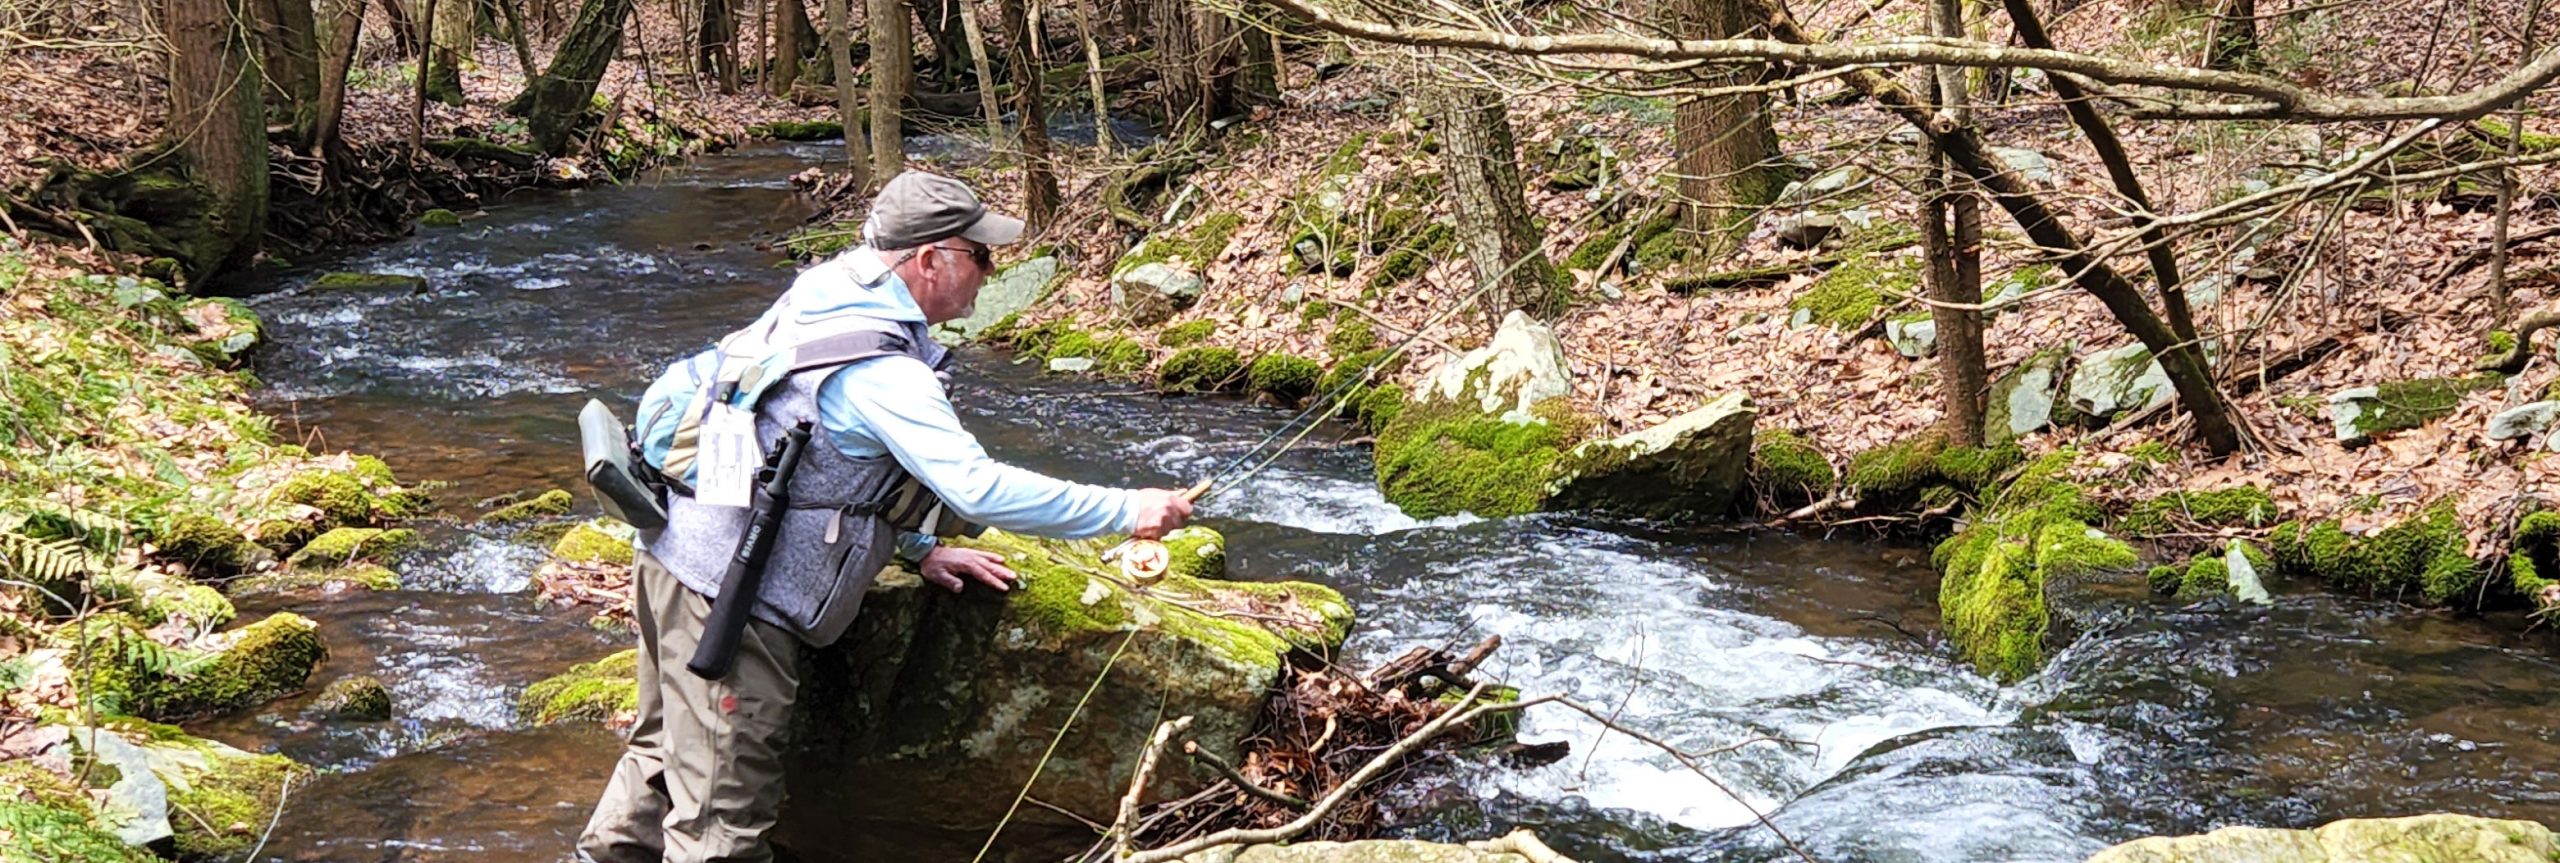 We Fly Fish Small Streams For Brook Trout